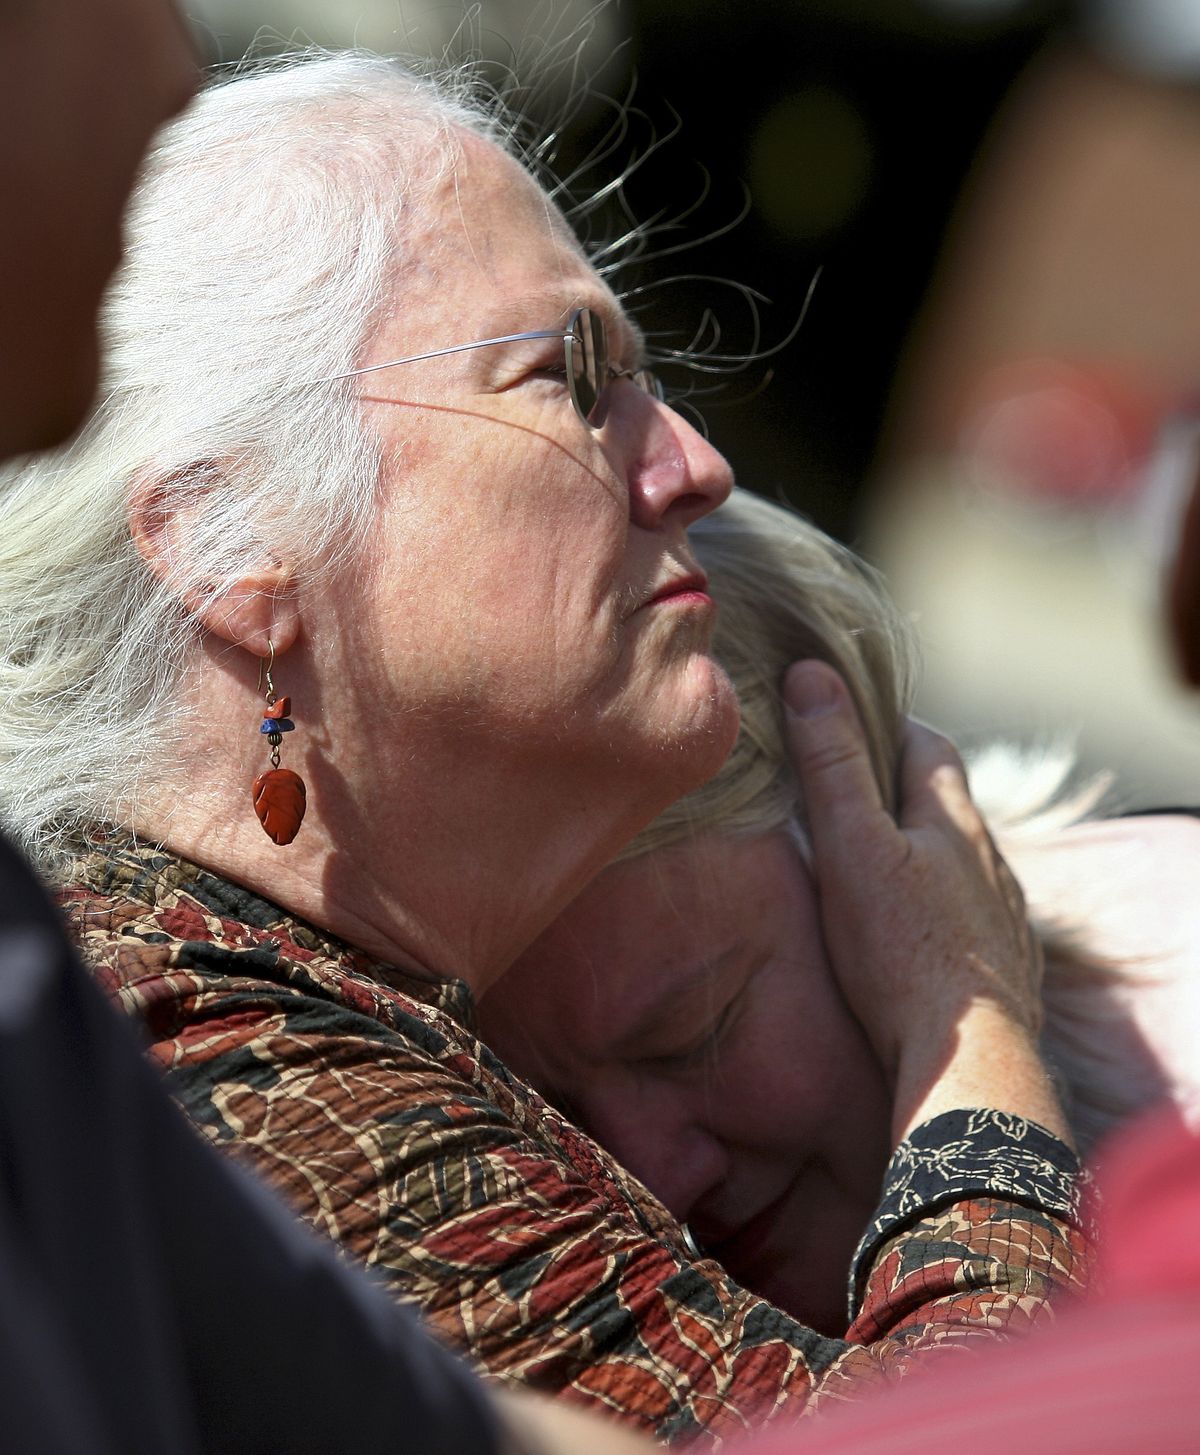 Jeanne Tessier, left, embraces her sister Janet outside the DeKalb County Courthouse in Sycamore, Ill. on Friday, Sept. 14, 2012, following the guilty verdict of their half-brother Jack McCullough for the 1957 kidnapping and murder of 7-year-old Maria Ridulph, of Sycamore. The 72-year-old McCullough was convicted in one of the oldest unsolved crimes to eventually get to court in the U.S. (Kyle Bursaw / Daily Chronicle)